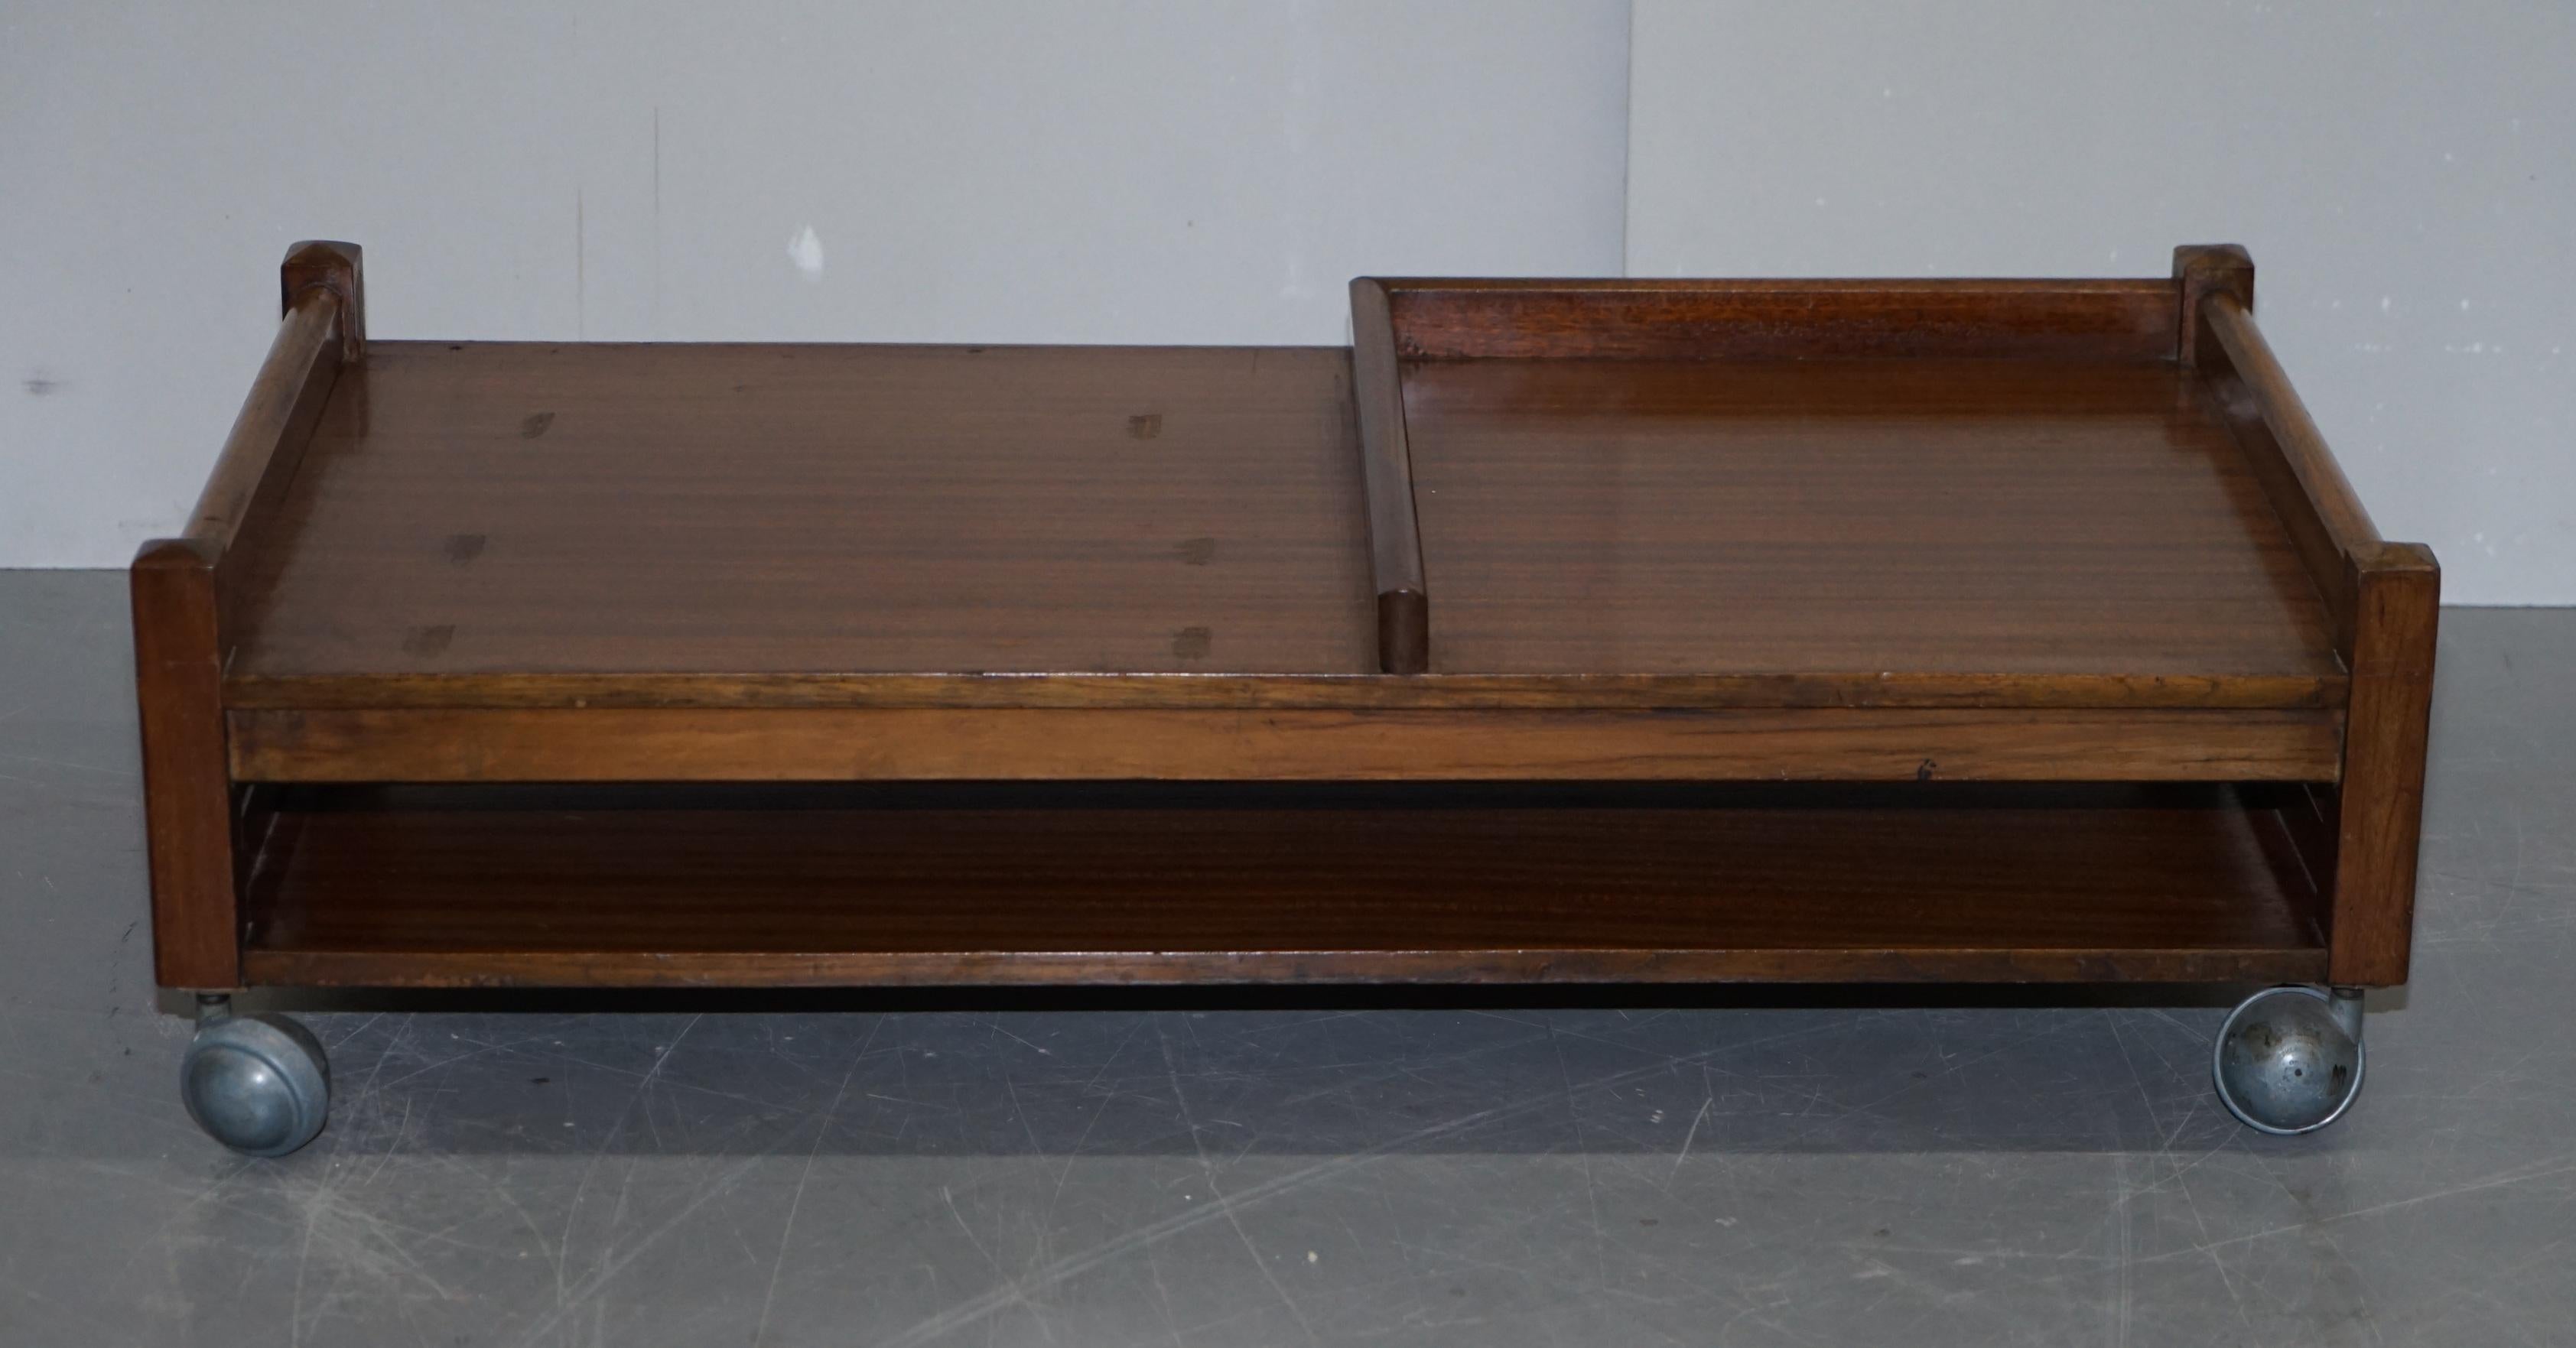 We are delighted to offer for sale this lovely very low Mid-Century Modern teak coffee table on Kendrick castors

A very good looking, well made and decorative coffee table

We have cleaned waxed and polished it from top to bottom, there will be